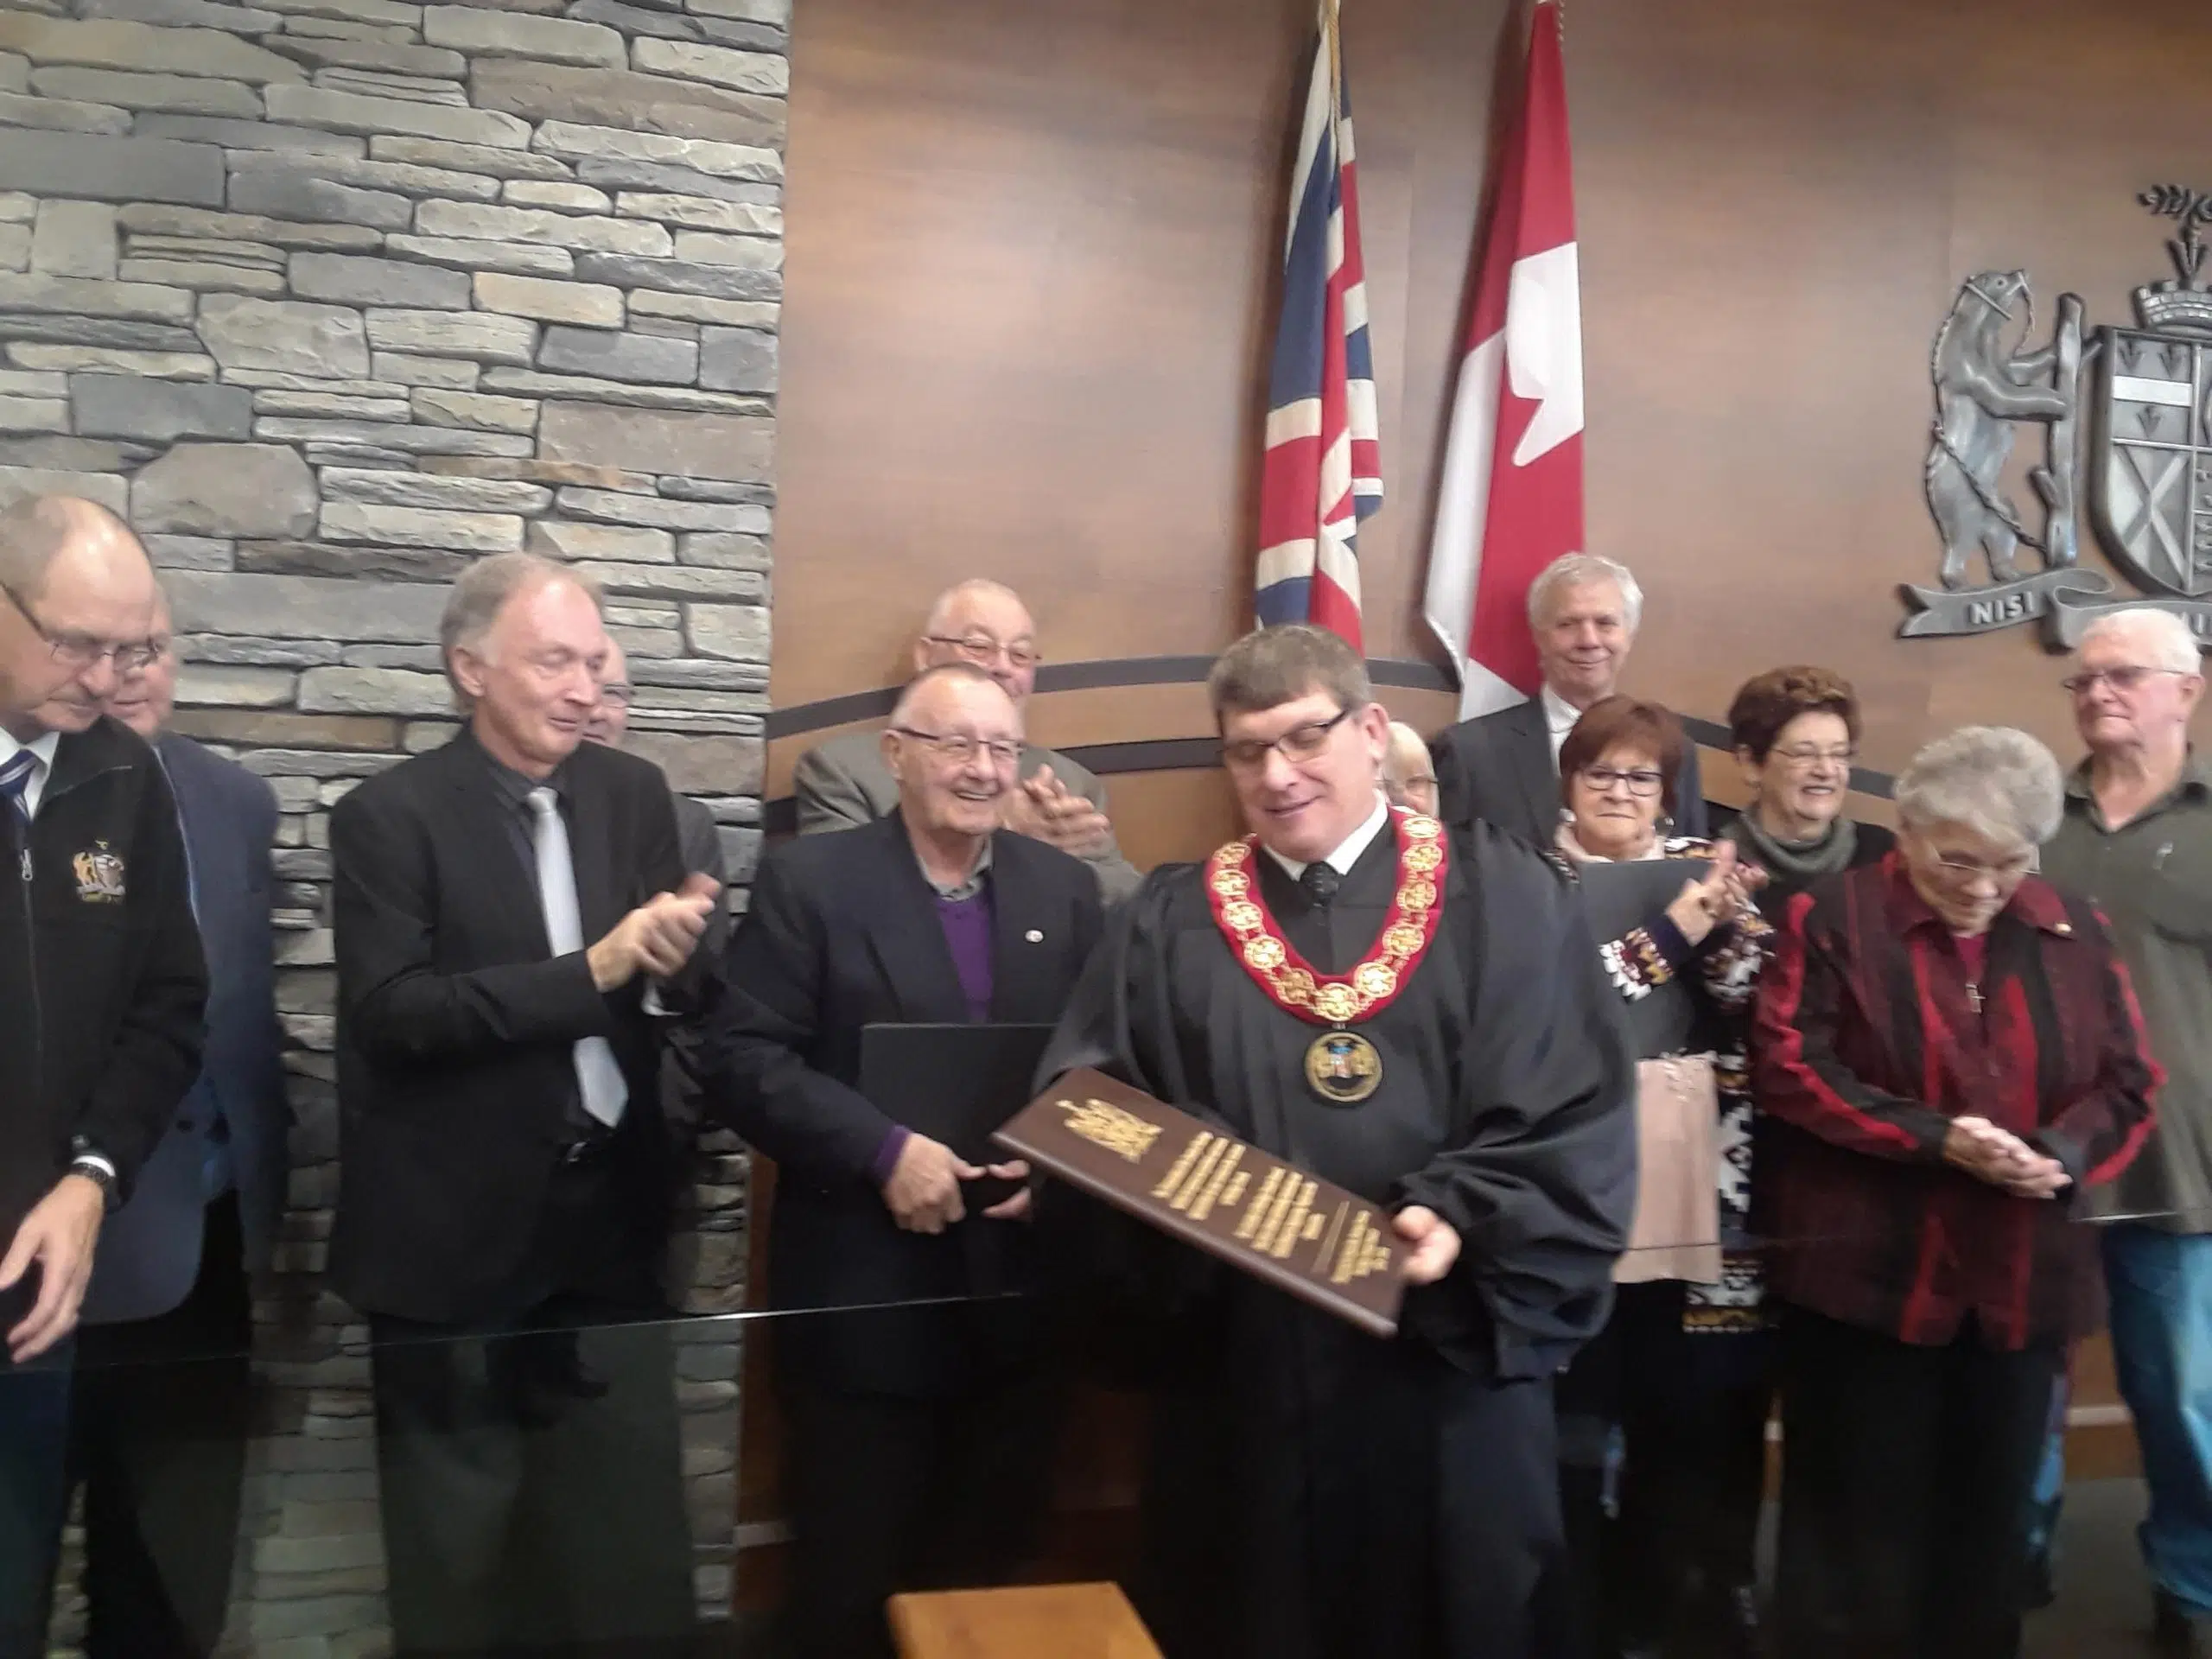 Paying tribute to warden and councillors